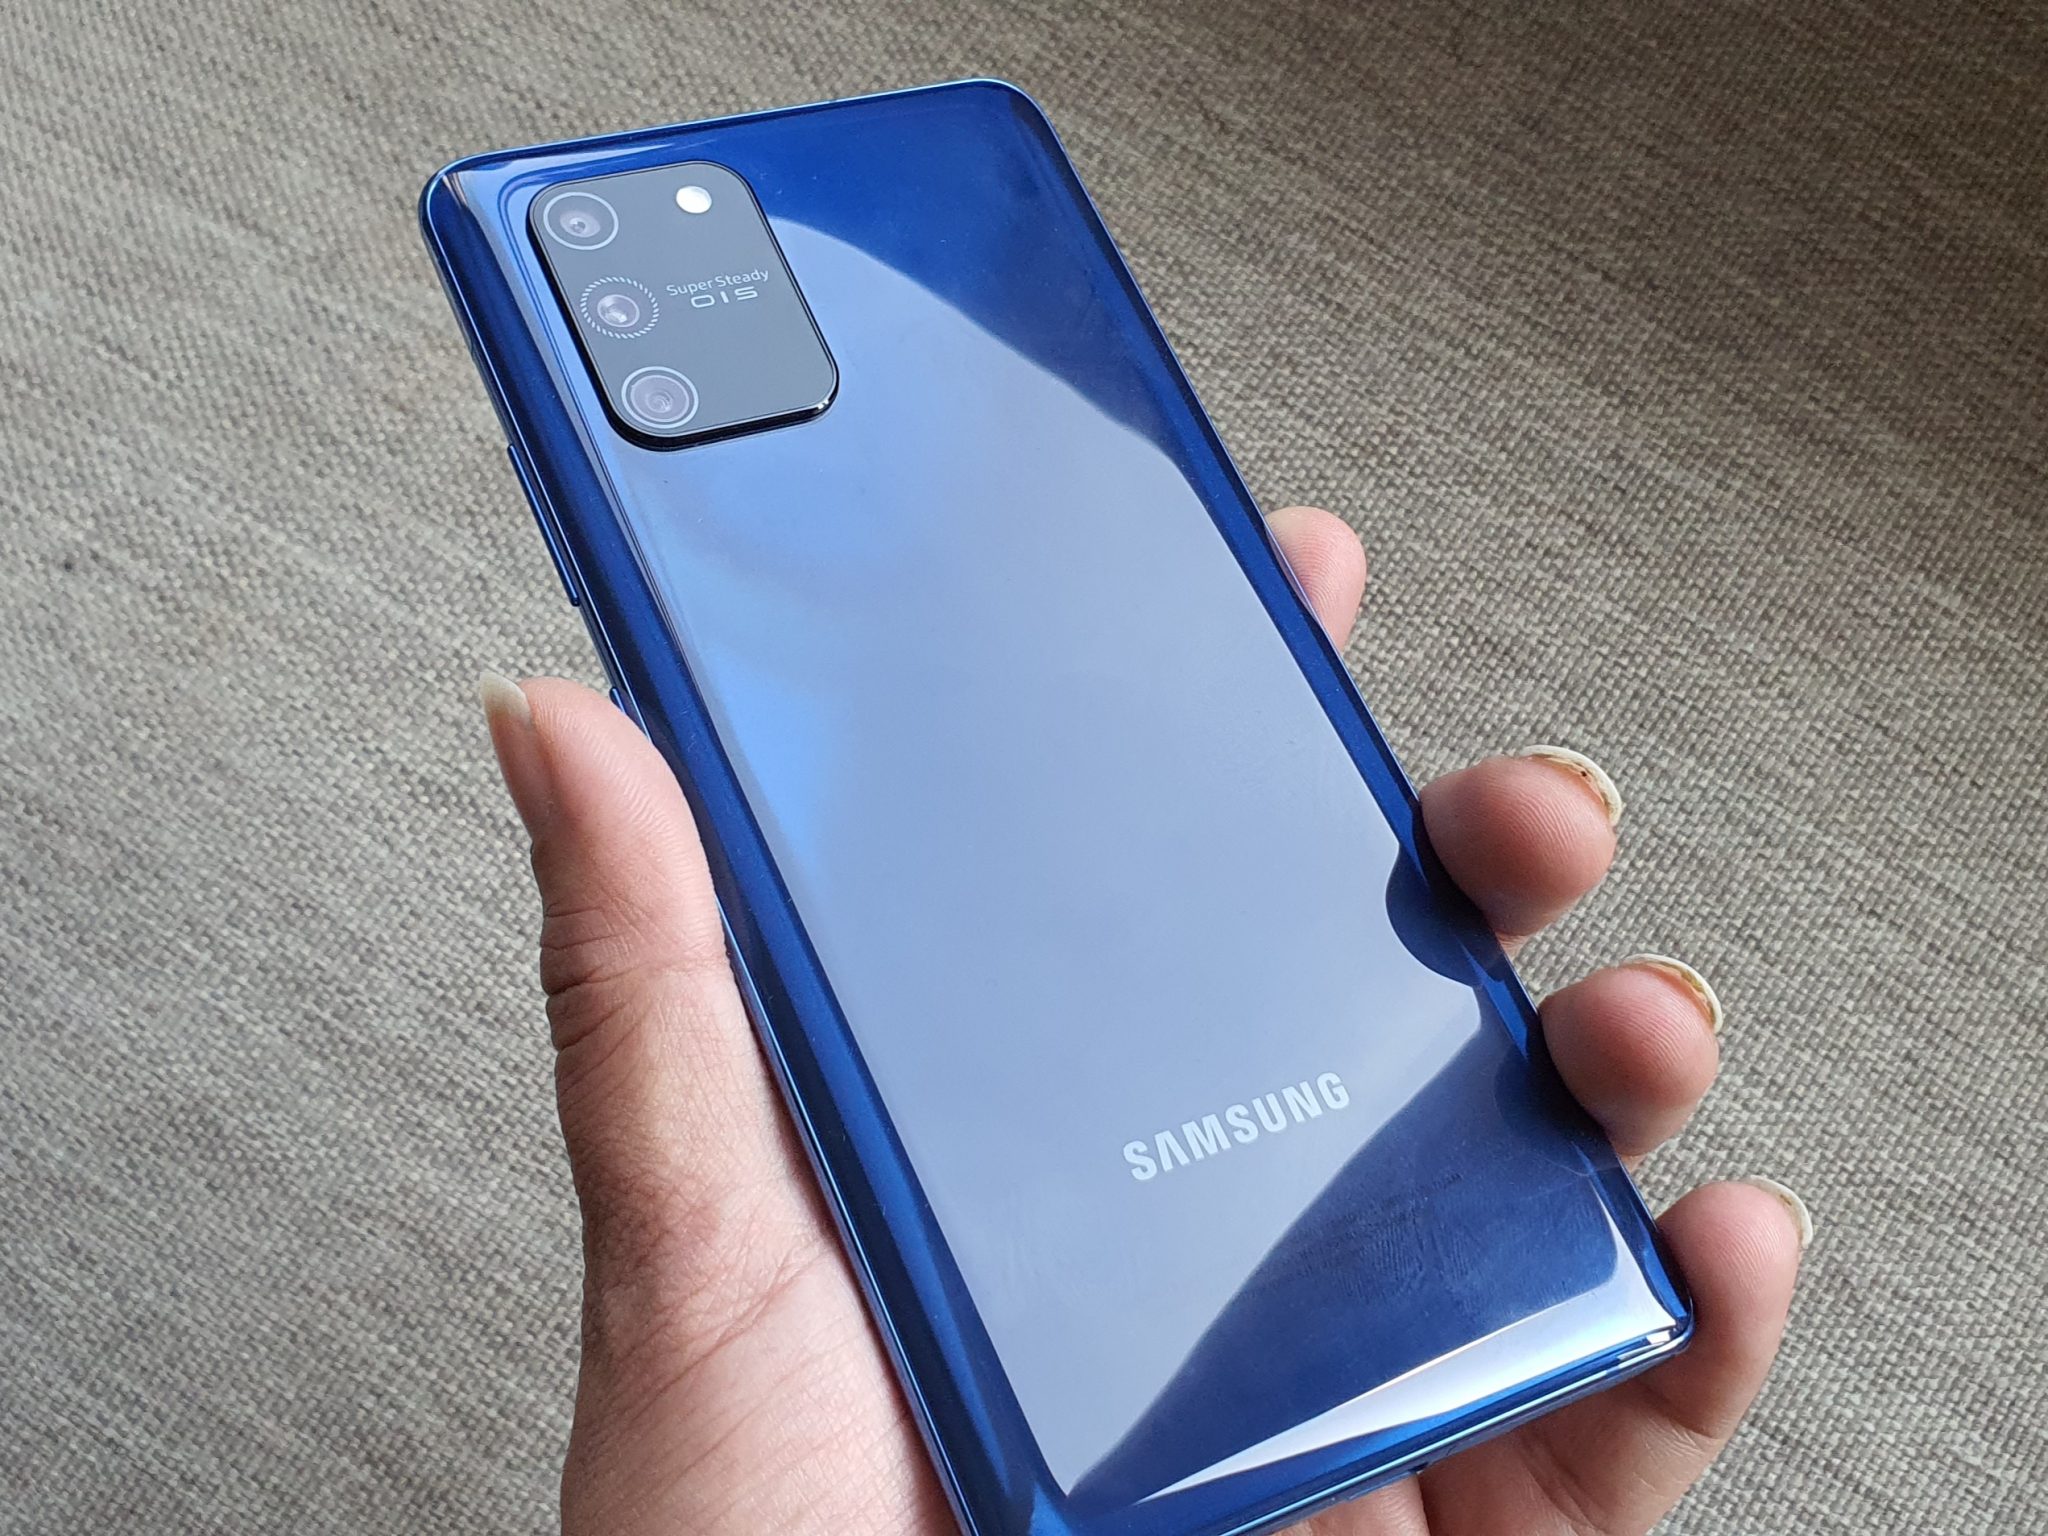 Samsung Launches Galaxy S10 Lite In India At INR 39,999/-